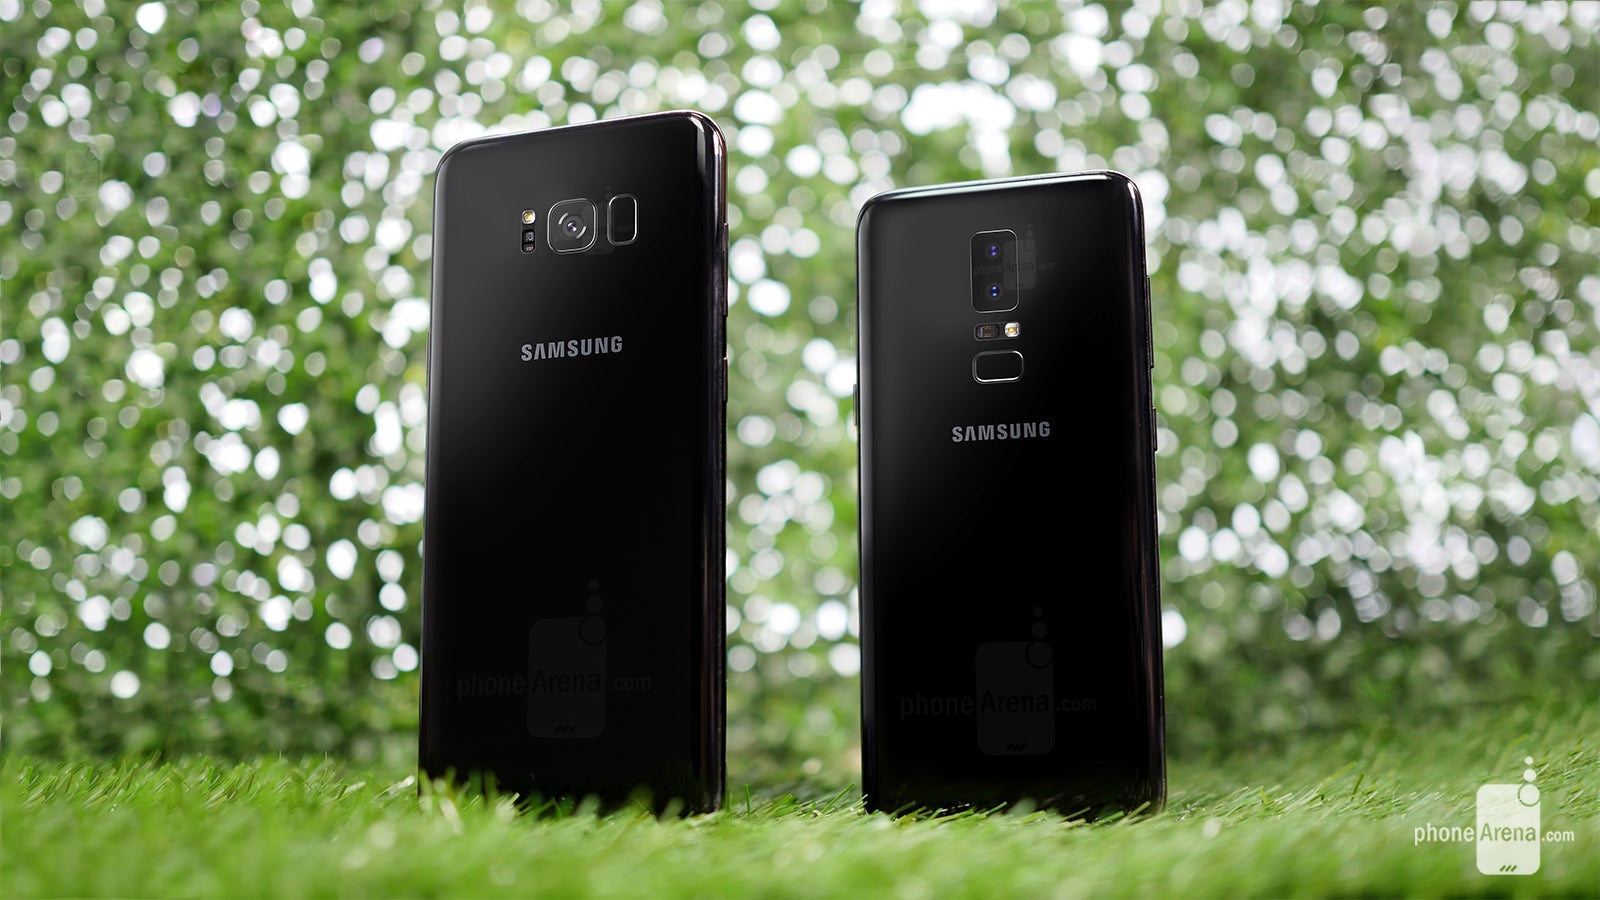 Galaxy S8+ (left) next to a Galaxy S9 mockup - Awesome Galaxy S9 renders offer an early glimpse at what Samsung's next flagships might look like